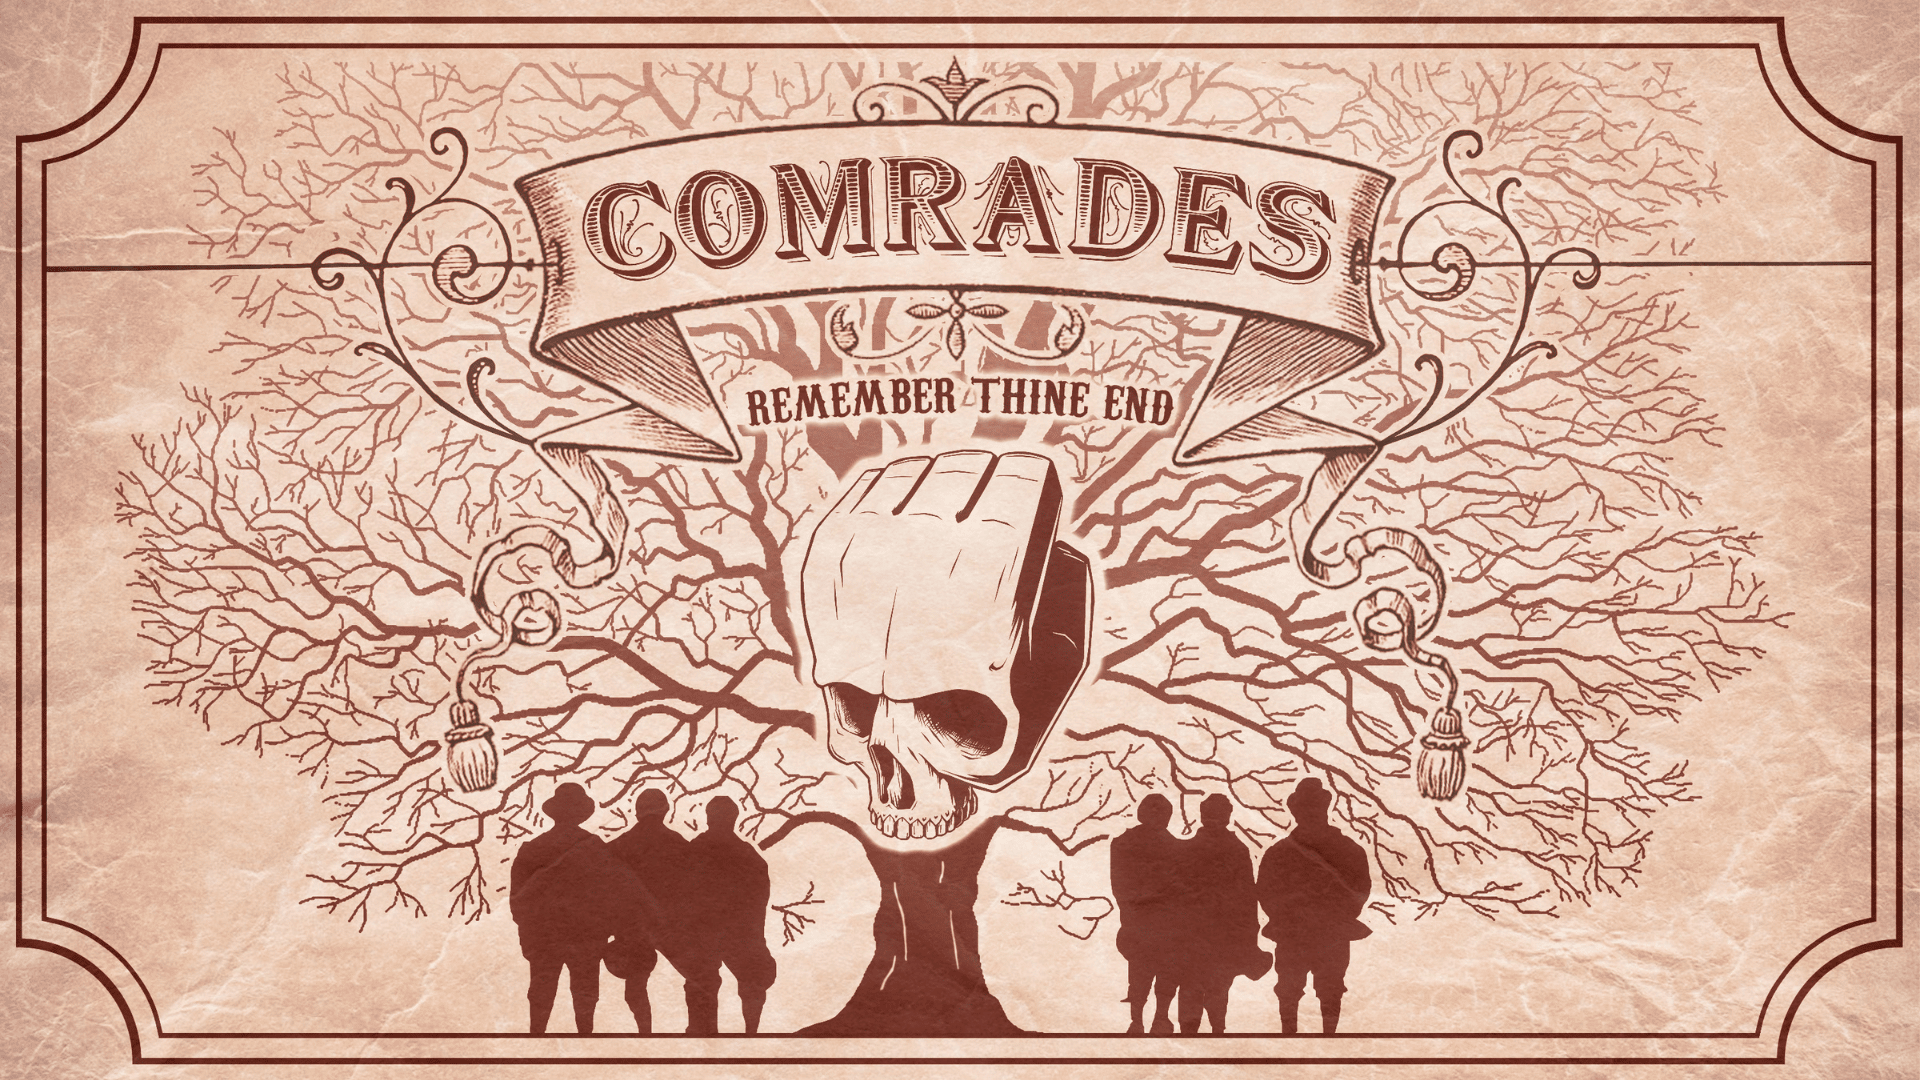 Sepia drawing of a tree with a skull shaped like a fist at its heart. six figures are standing underneath. A scroll , banner bears the text COMRADES remember thine end